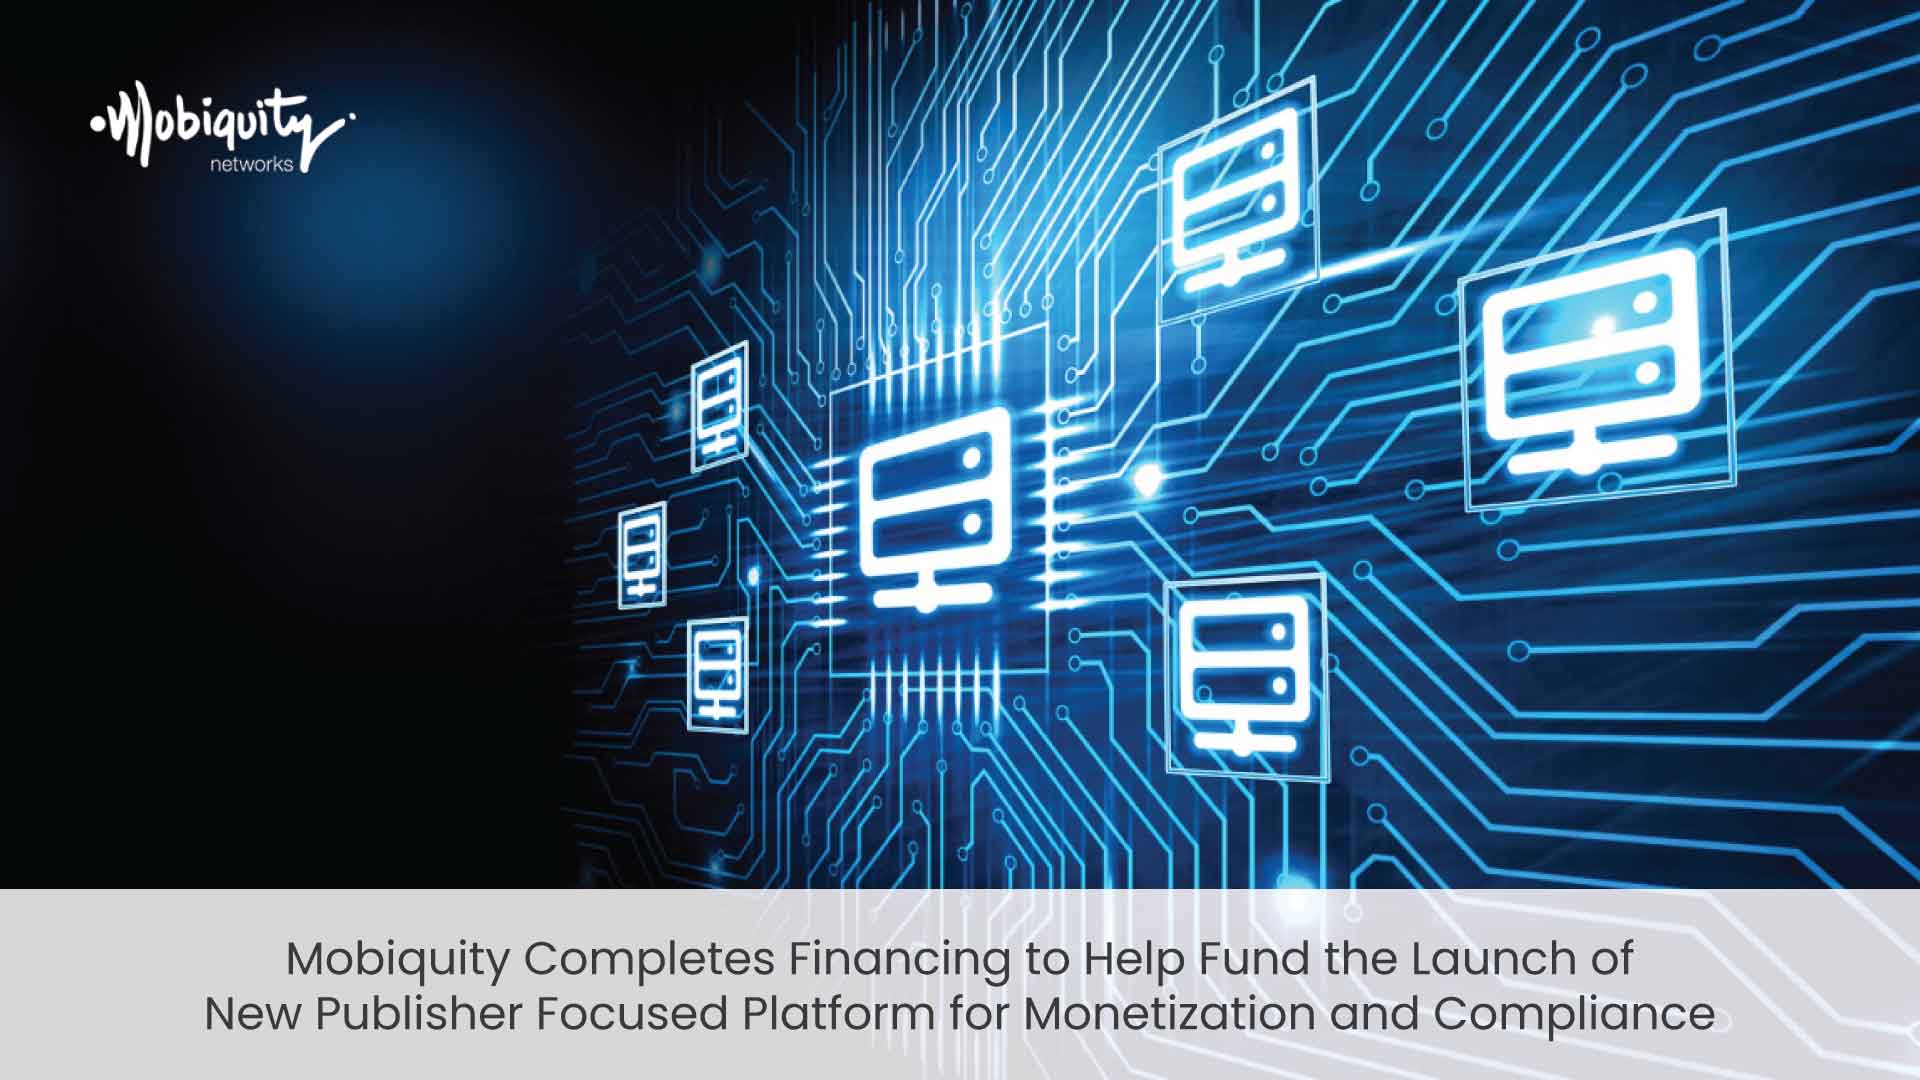 Mobiquity Completes Financing to Help Fund the Launch of New Publisher Focused Platform for Monetization and Compliance